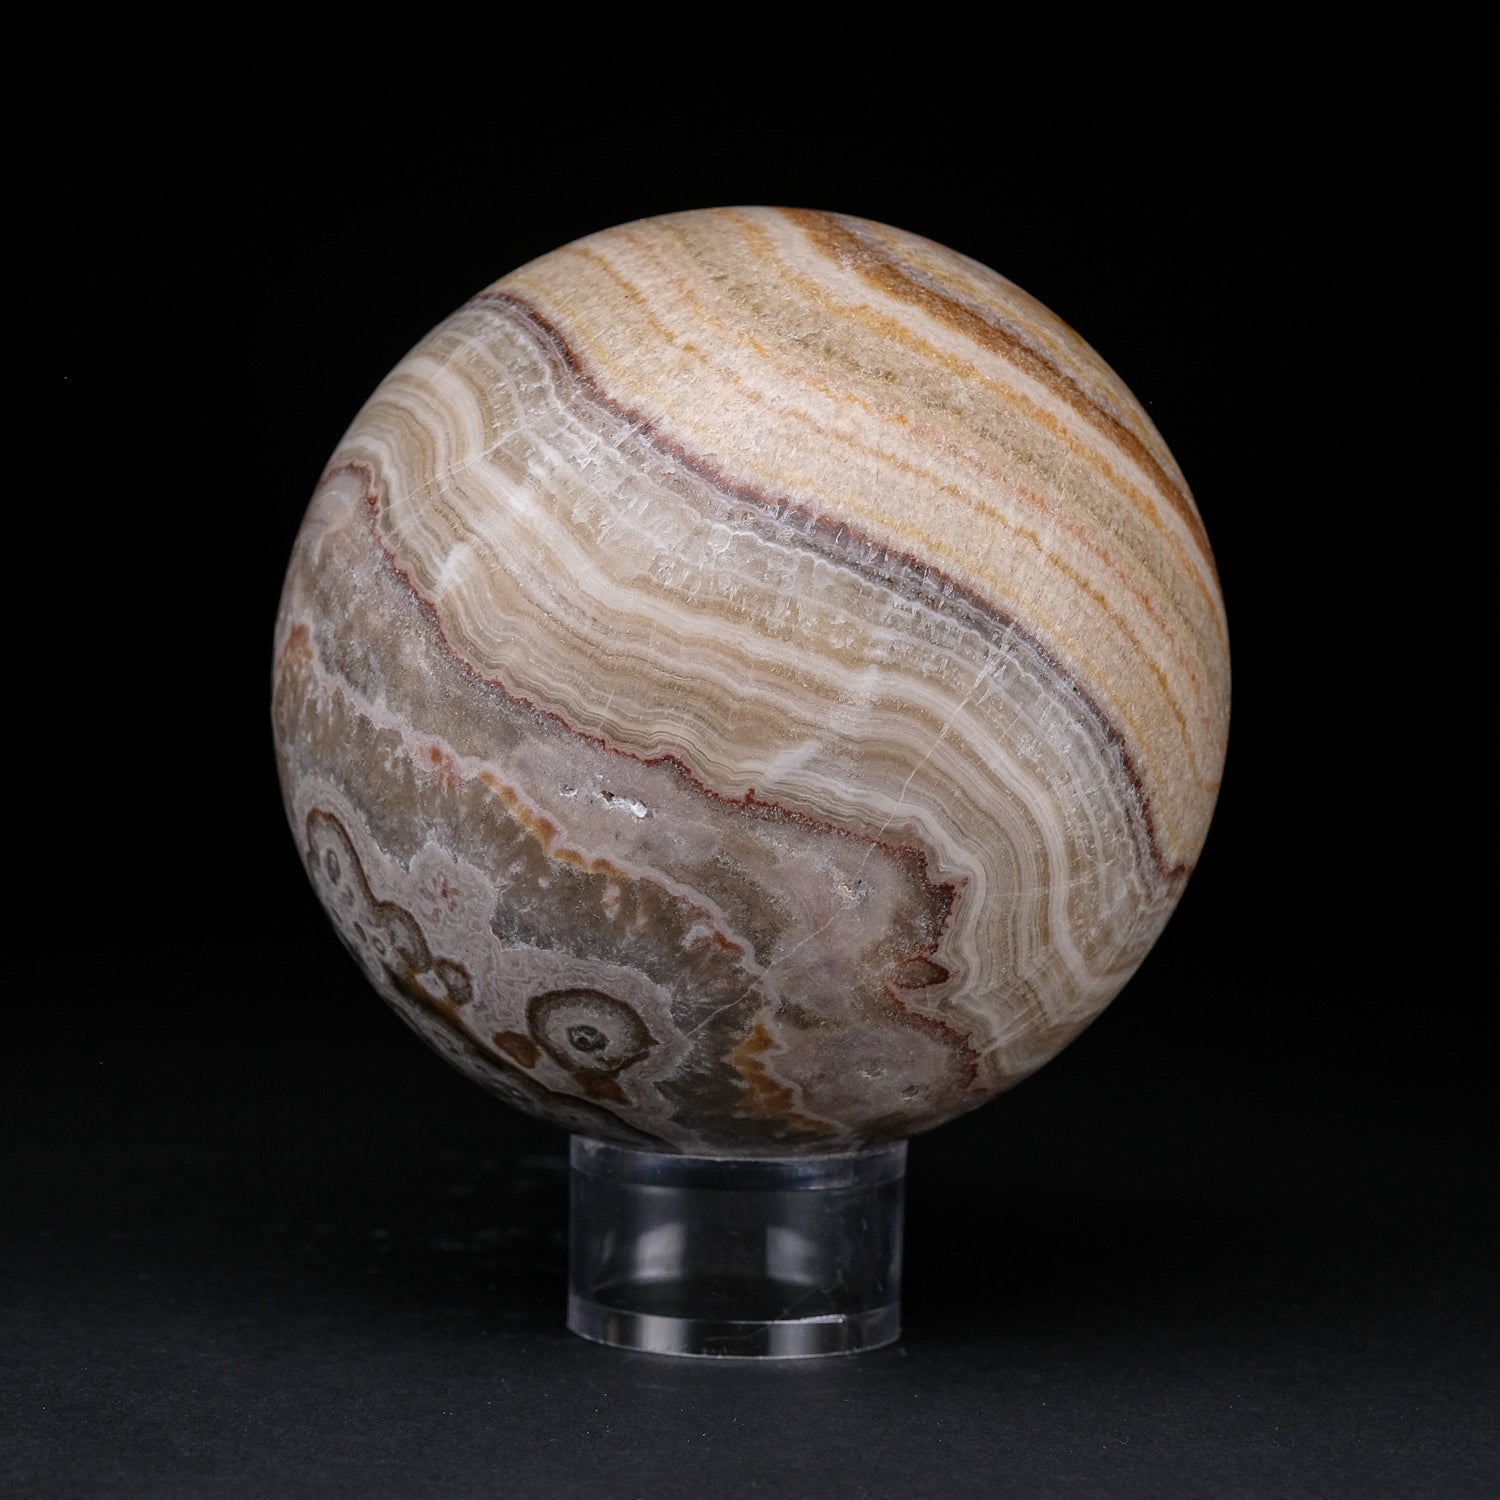 Genuine Polished Brown Banded Onyx Sphere from Mexico (3")